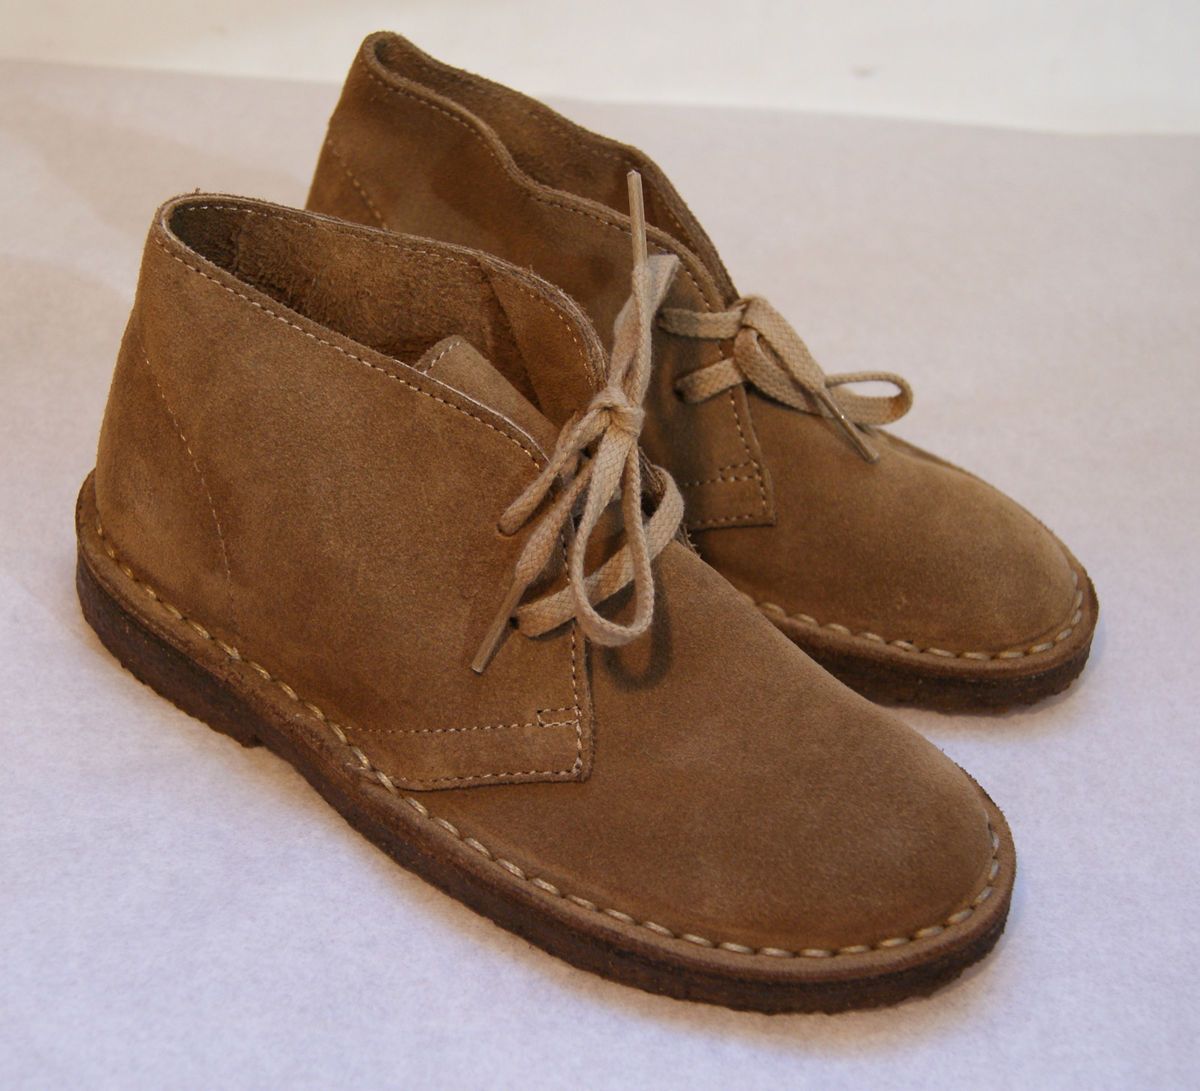 Crew Crewcuts $88 Kids Suede MacAlister Boots Size 5